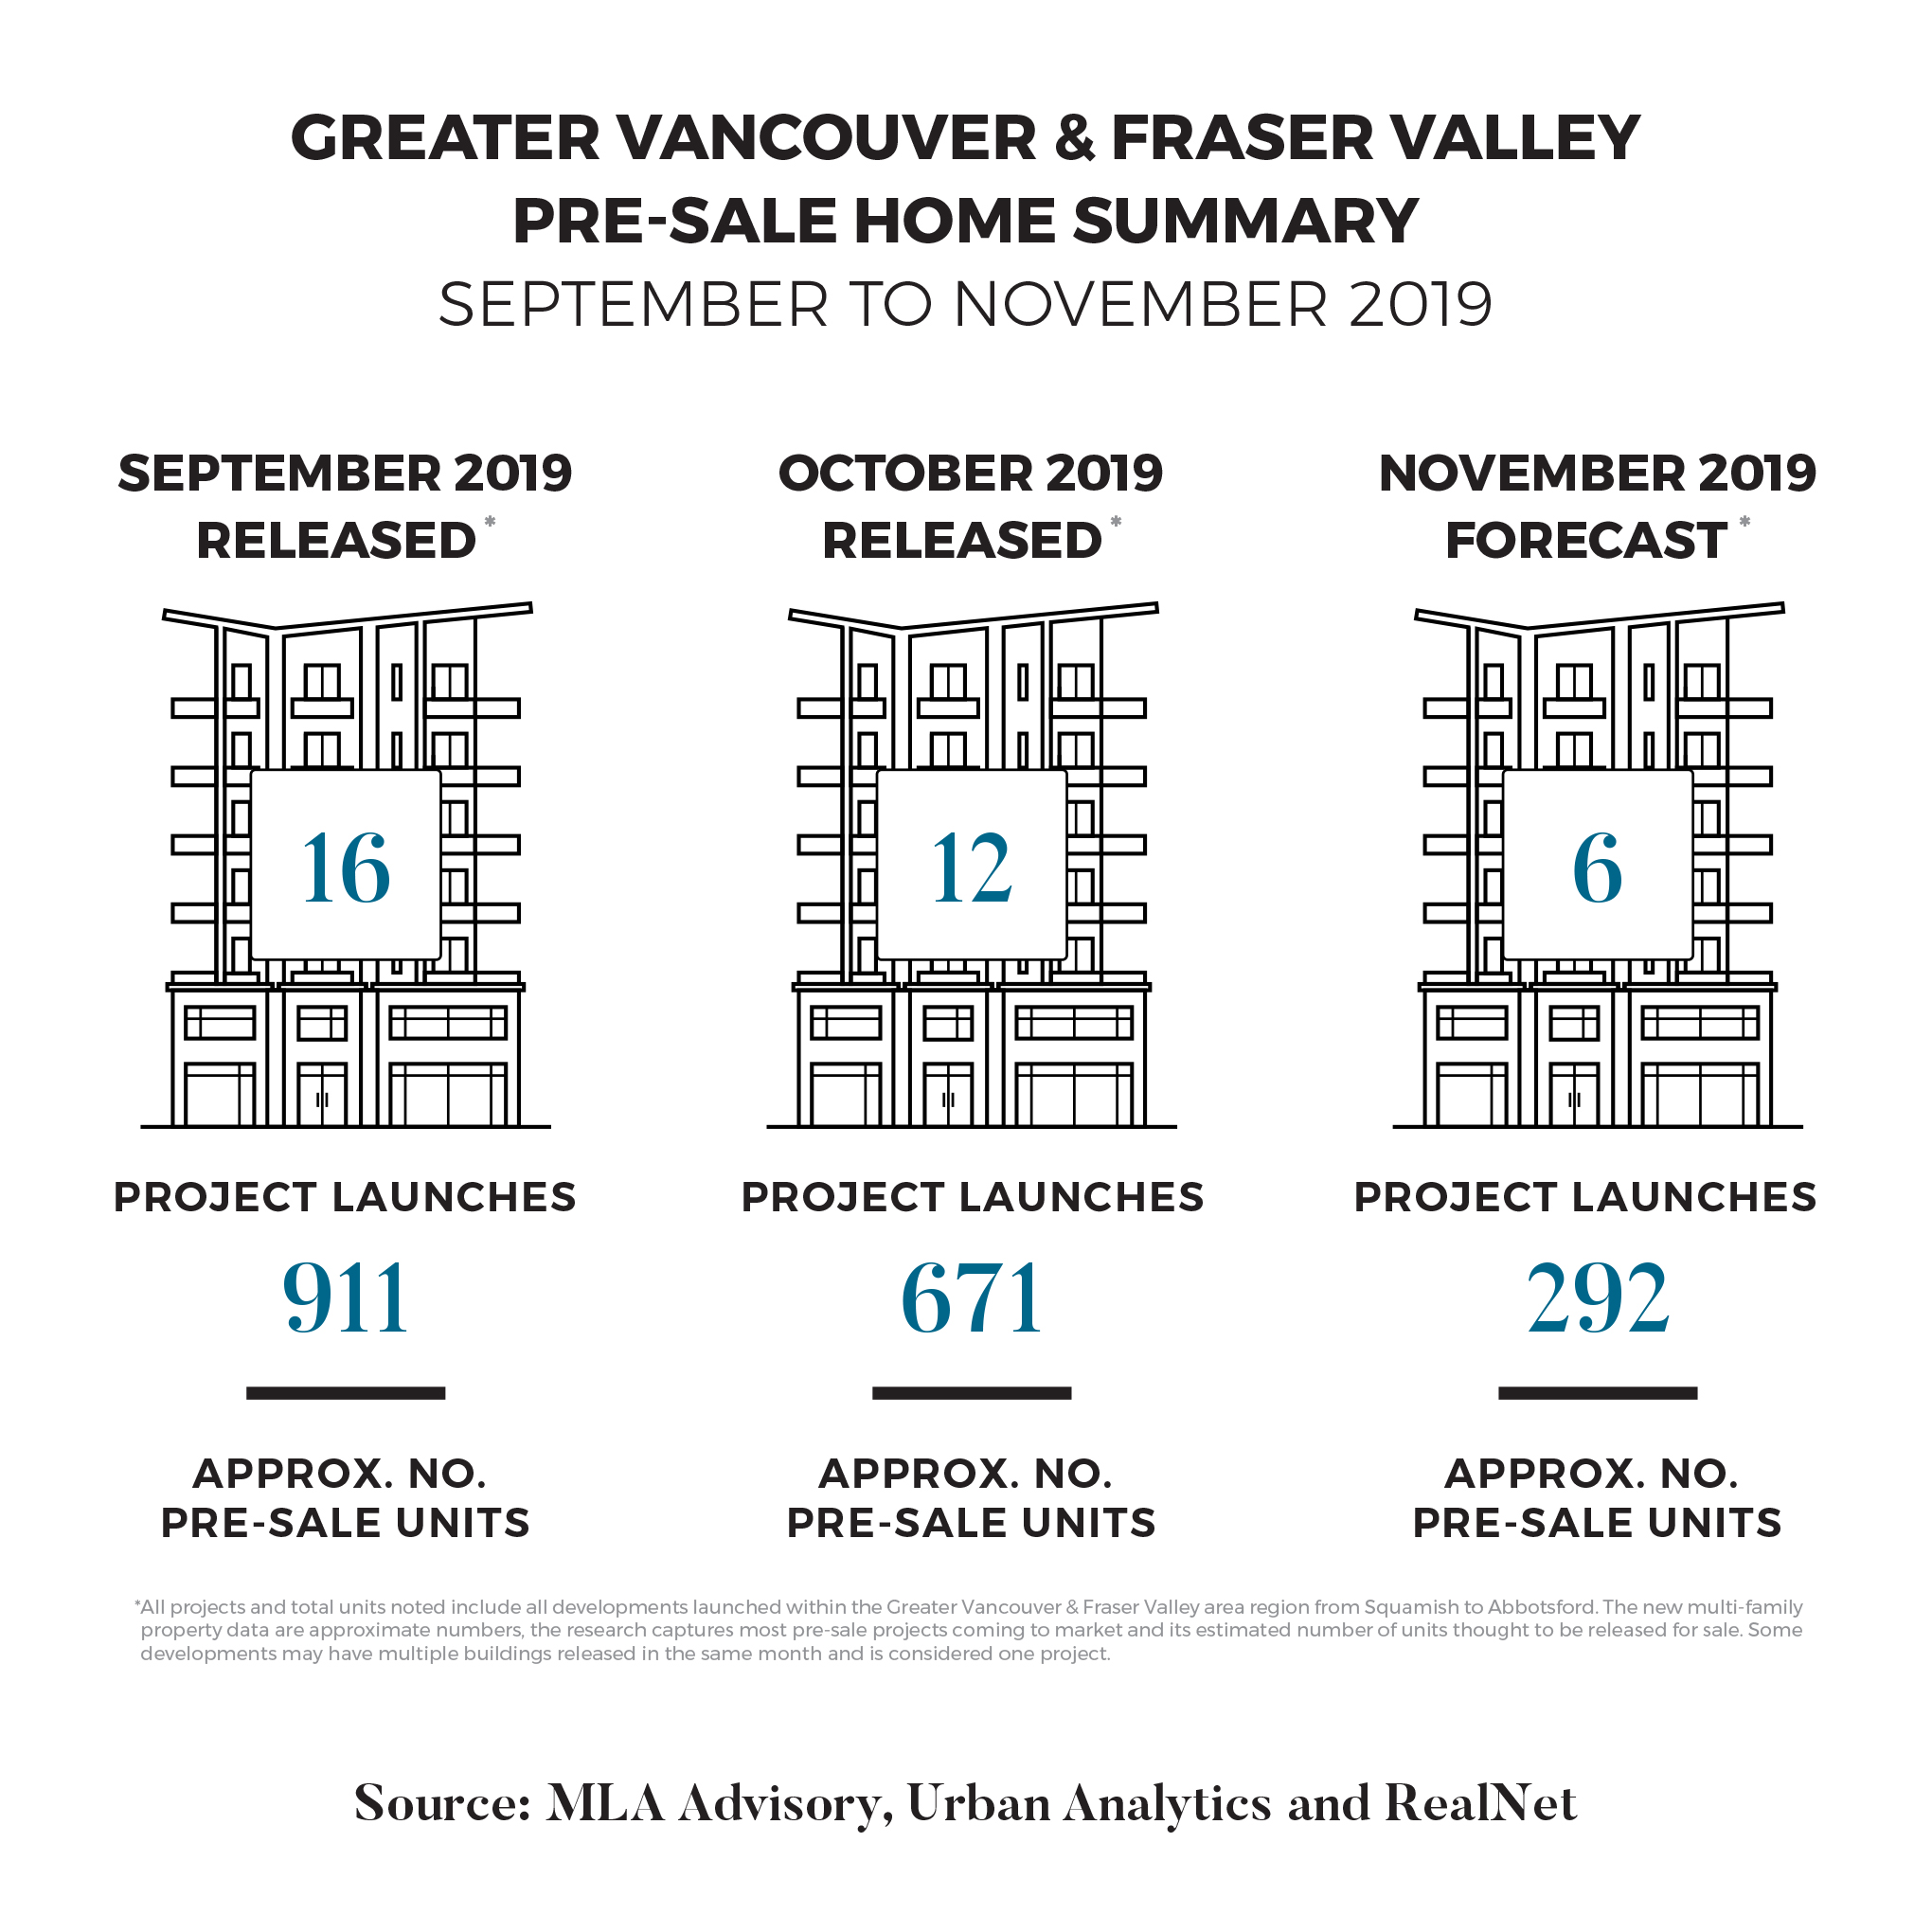 GREATER VANCOUVER & FRASER VALLEY PRE-SALE HOME SUMMARY